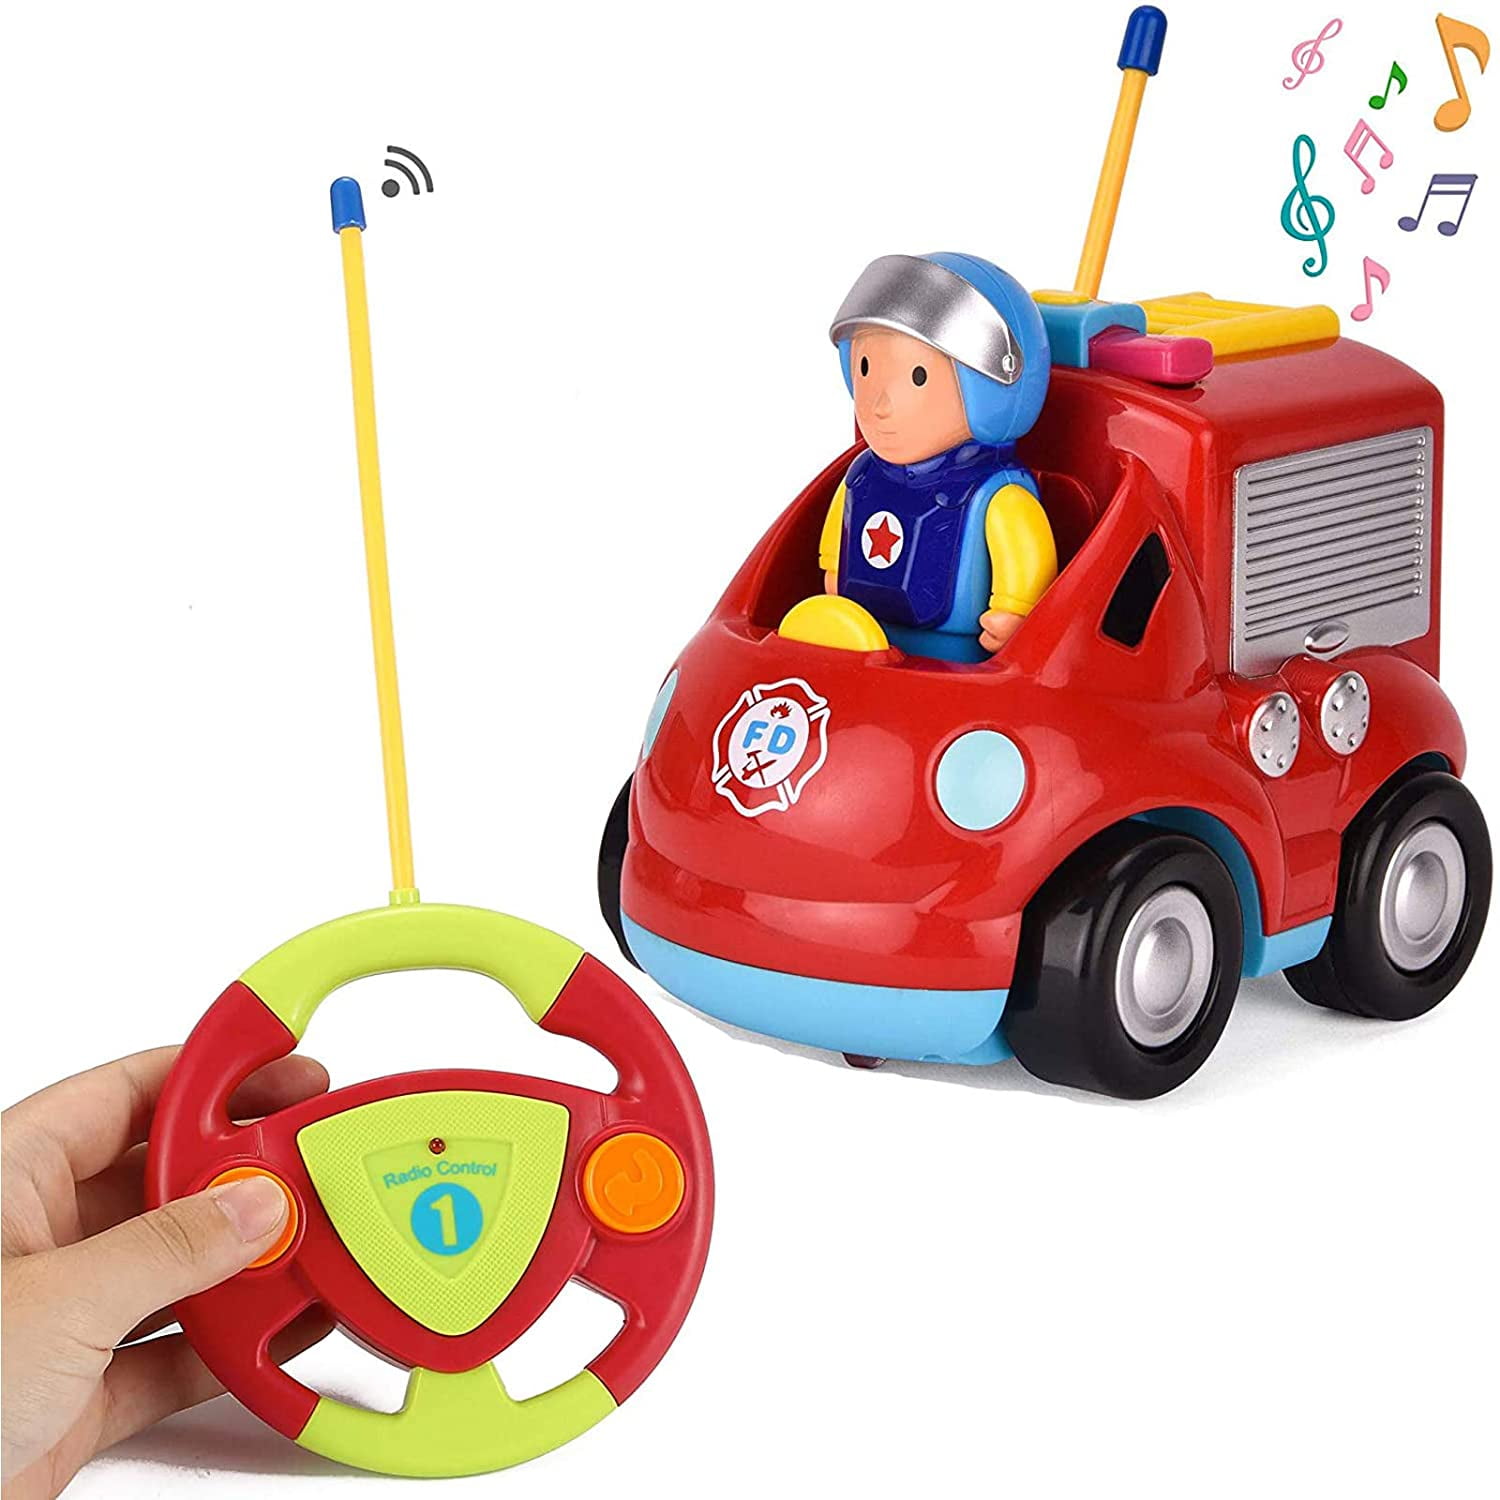 Airplane Lights and Sound for Baby Music Kids Liberty Imports My First RC Cartoon Car Vehicle 2-Channel Remote Control Toy Toddlers 